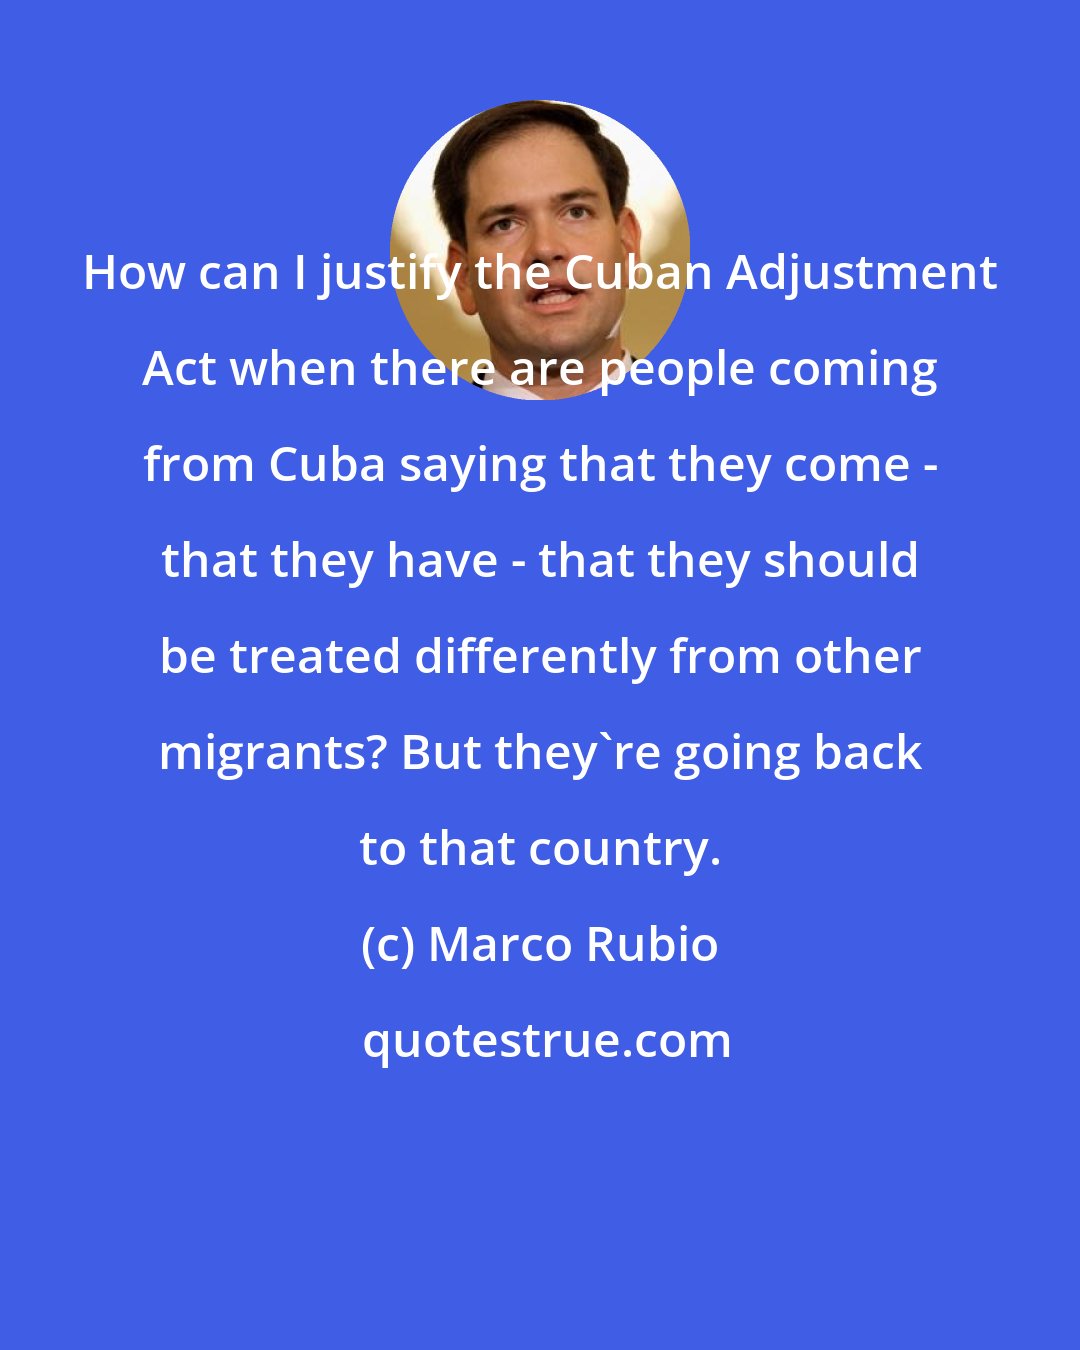 Marco Rubio: How can I justify the Cuban Adjustment Act when there are people coming from Cuba saying that they come - that they have - that they should be treated differently from other migrants? But they're going back to that country.